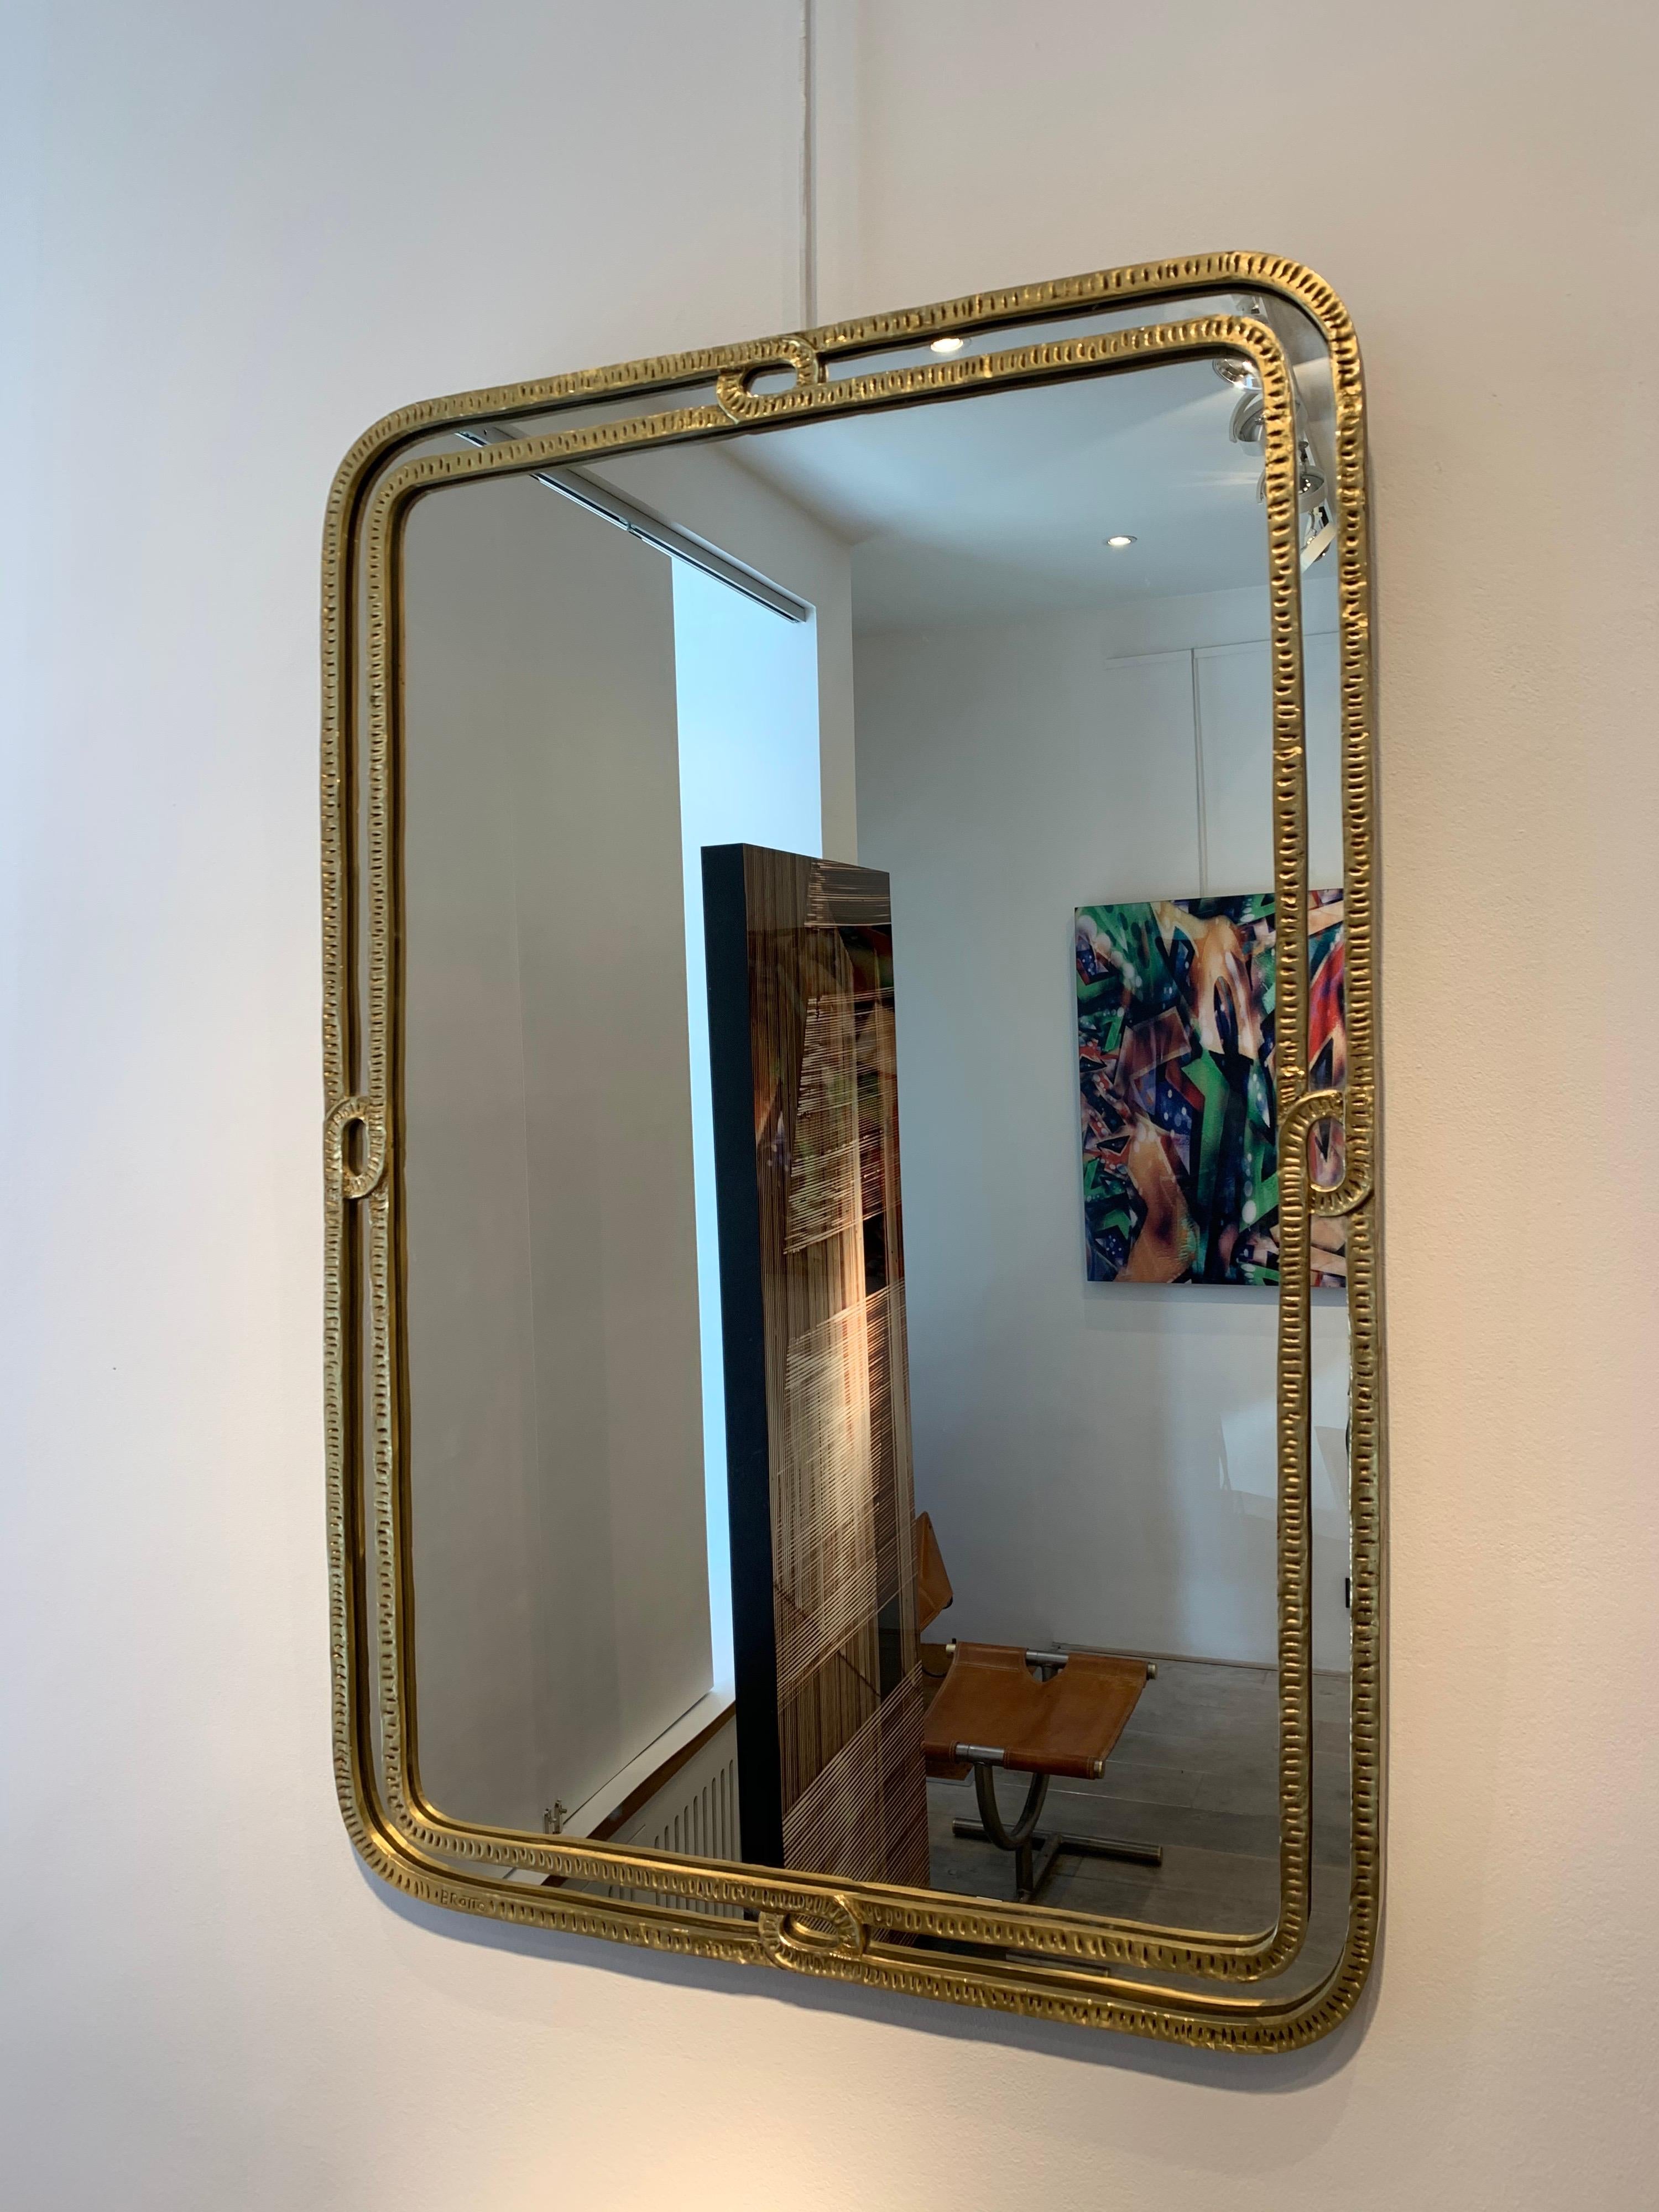 Angelo Brotto is a famous Italian designer, who specialised in lights and wall decoration. This mirror, which signed, is something rare and very elegant in his work.